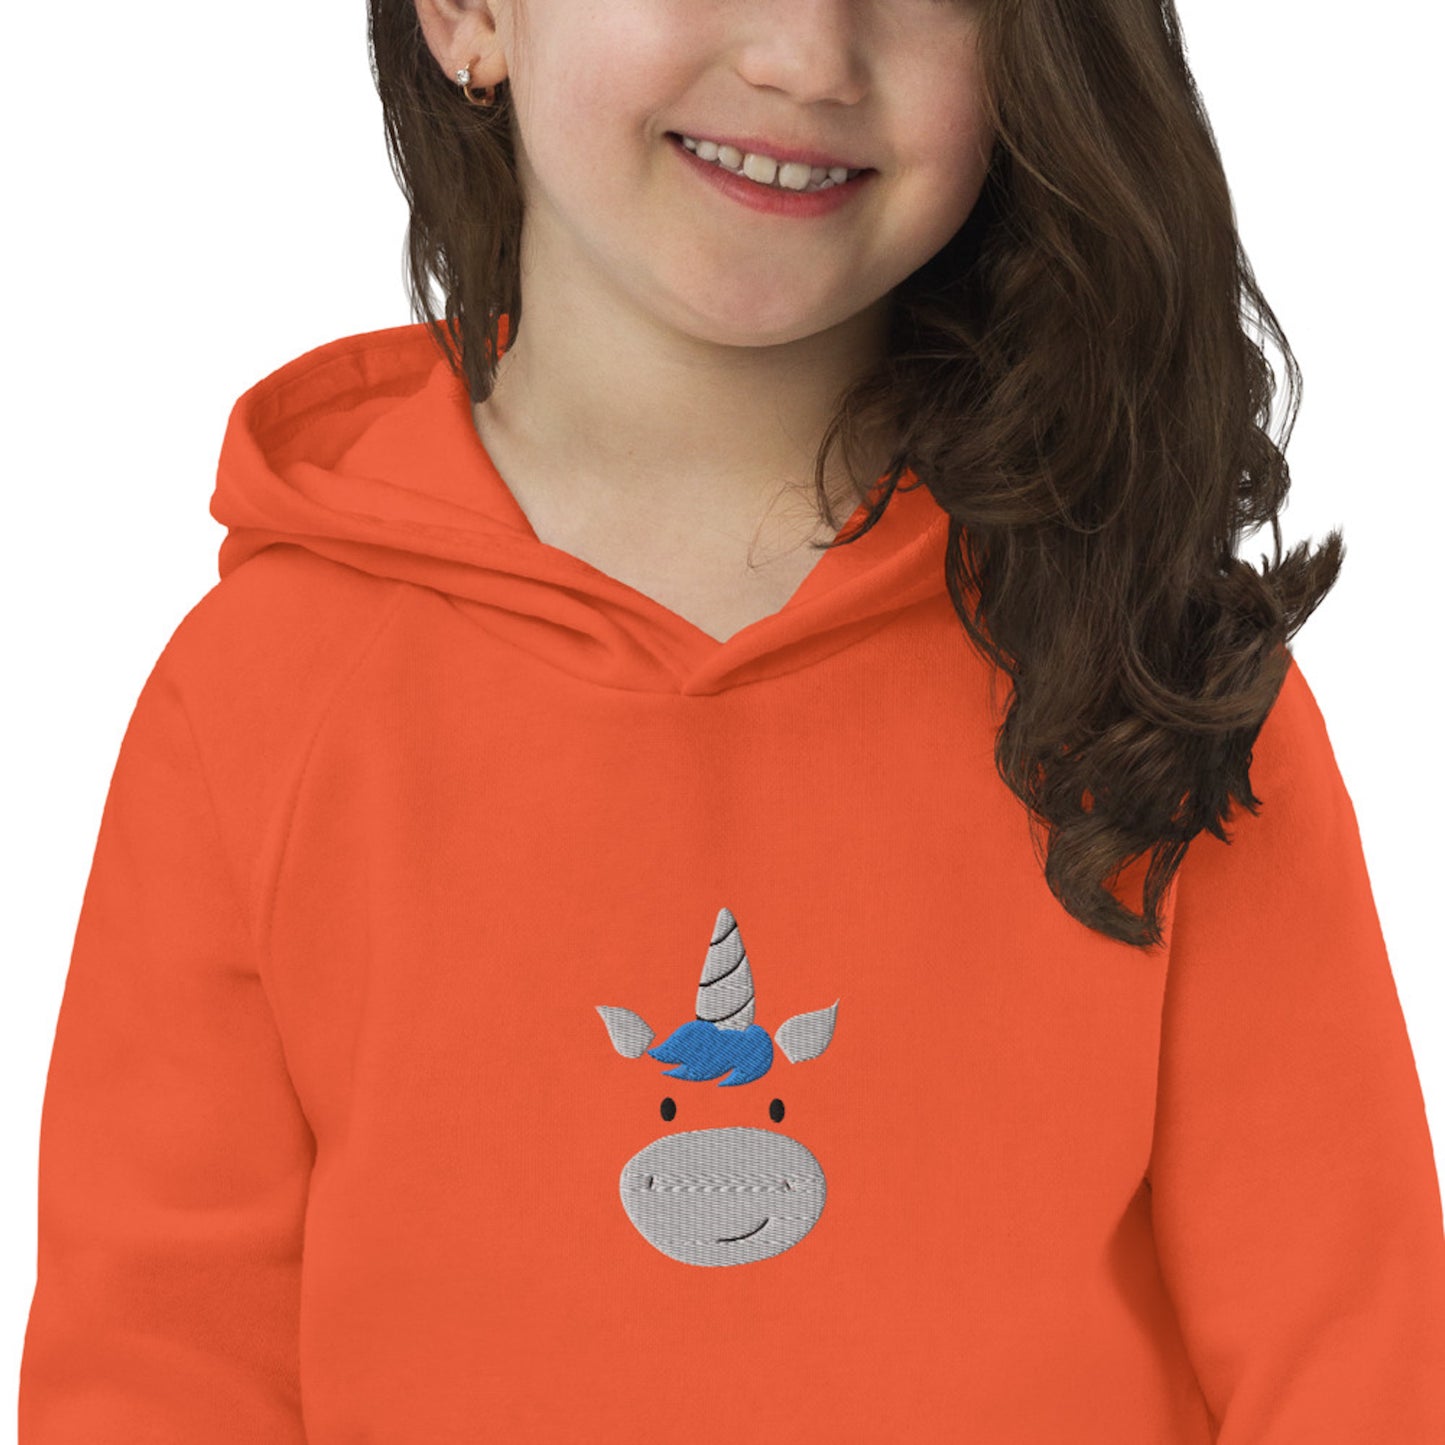 Unicorn Kids Eco Hoodie with cute animals, Organic Cotton pullover for children in black, gift idea for kids, soft hoodie for kids